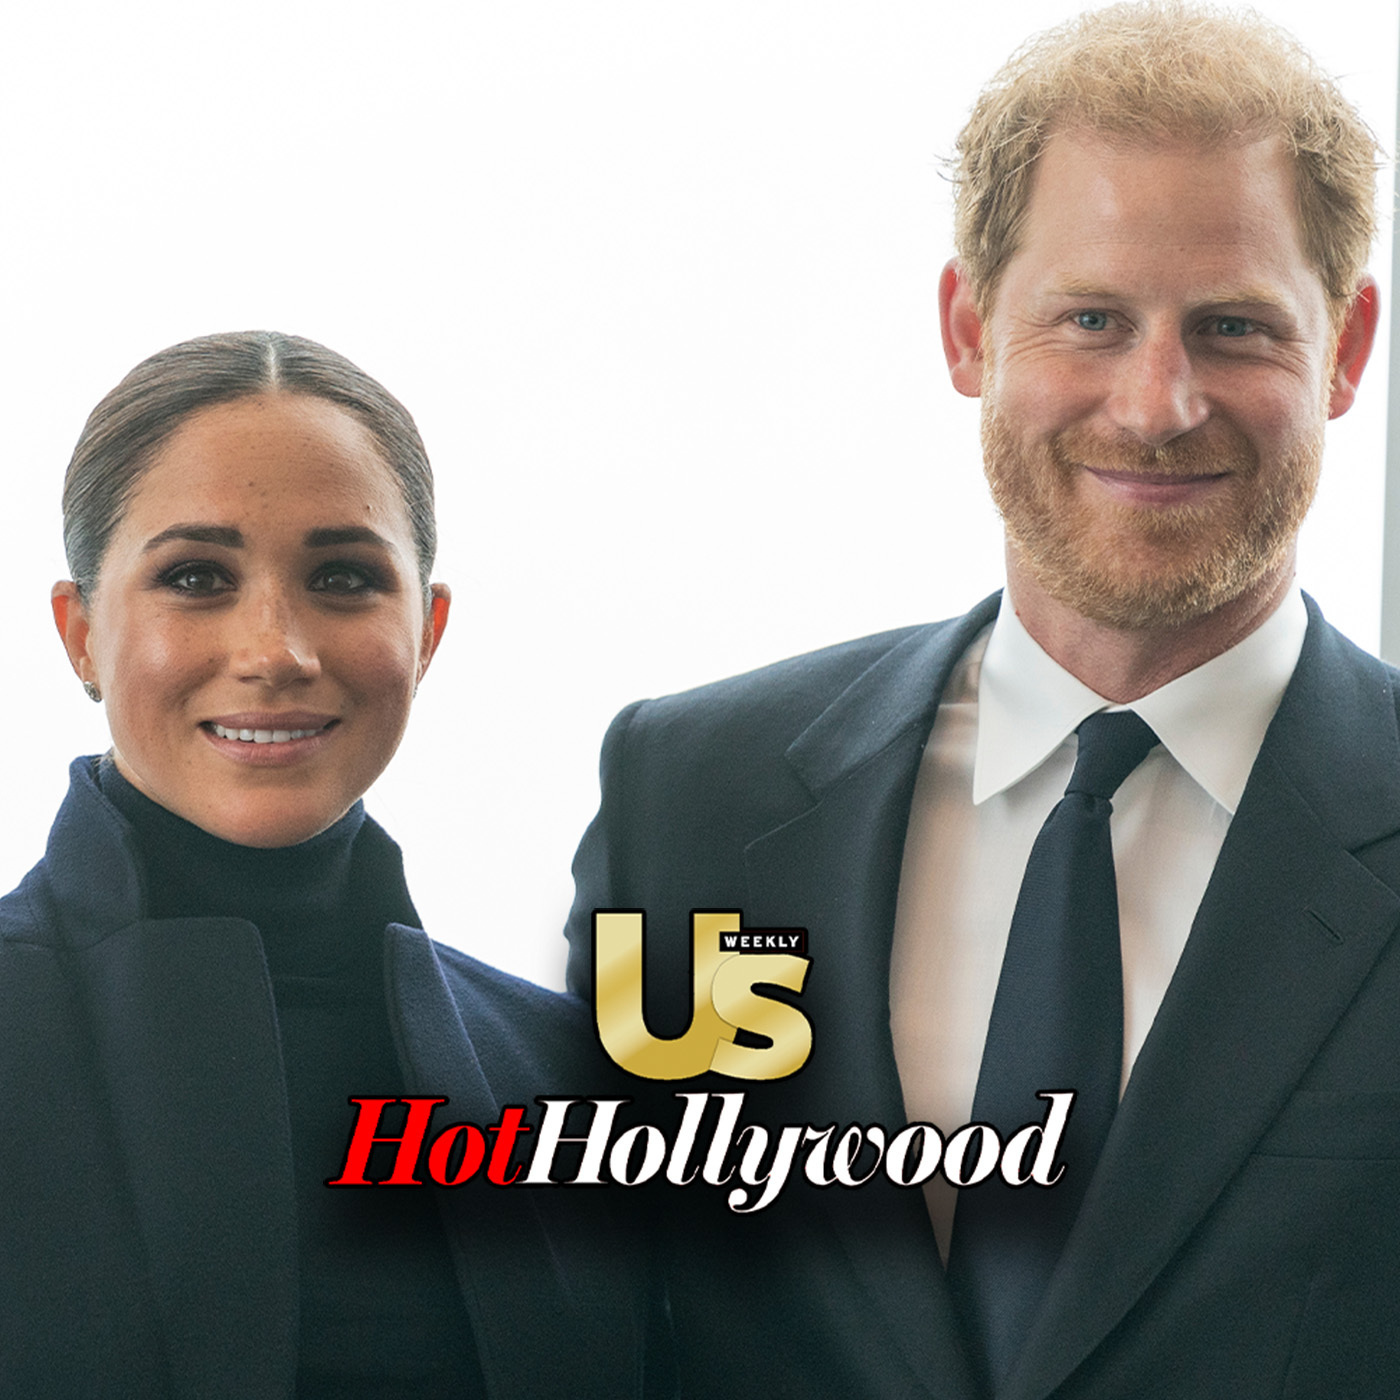 Prince Harry and Meghan’s royal eviction from Frogmore Cottage, and which scandalous royal is moving in, plus we talk Alec Baldwin’s new lawsuits filed against him.